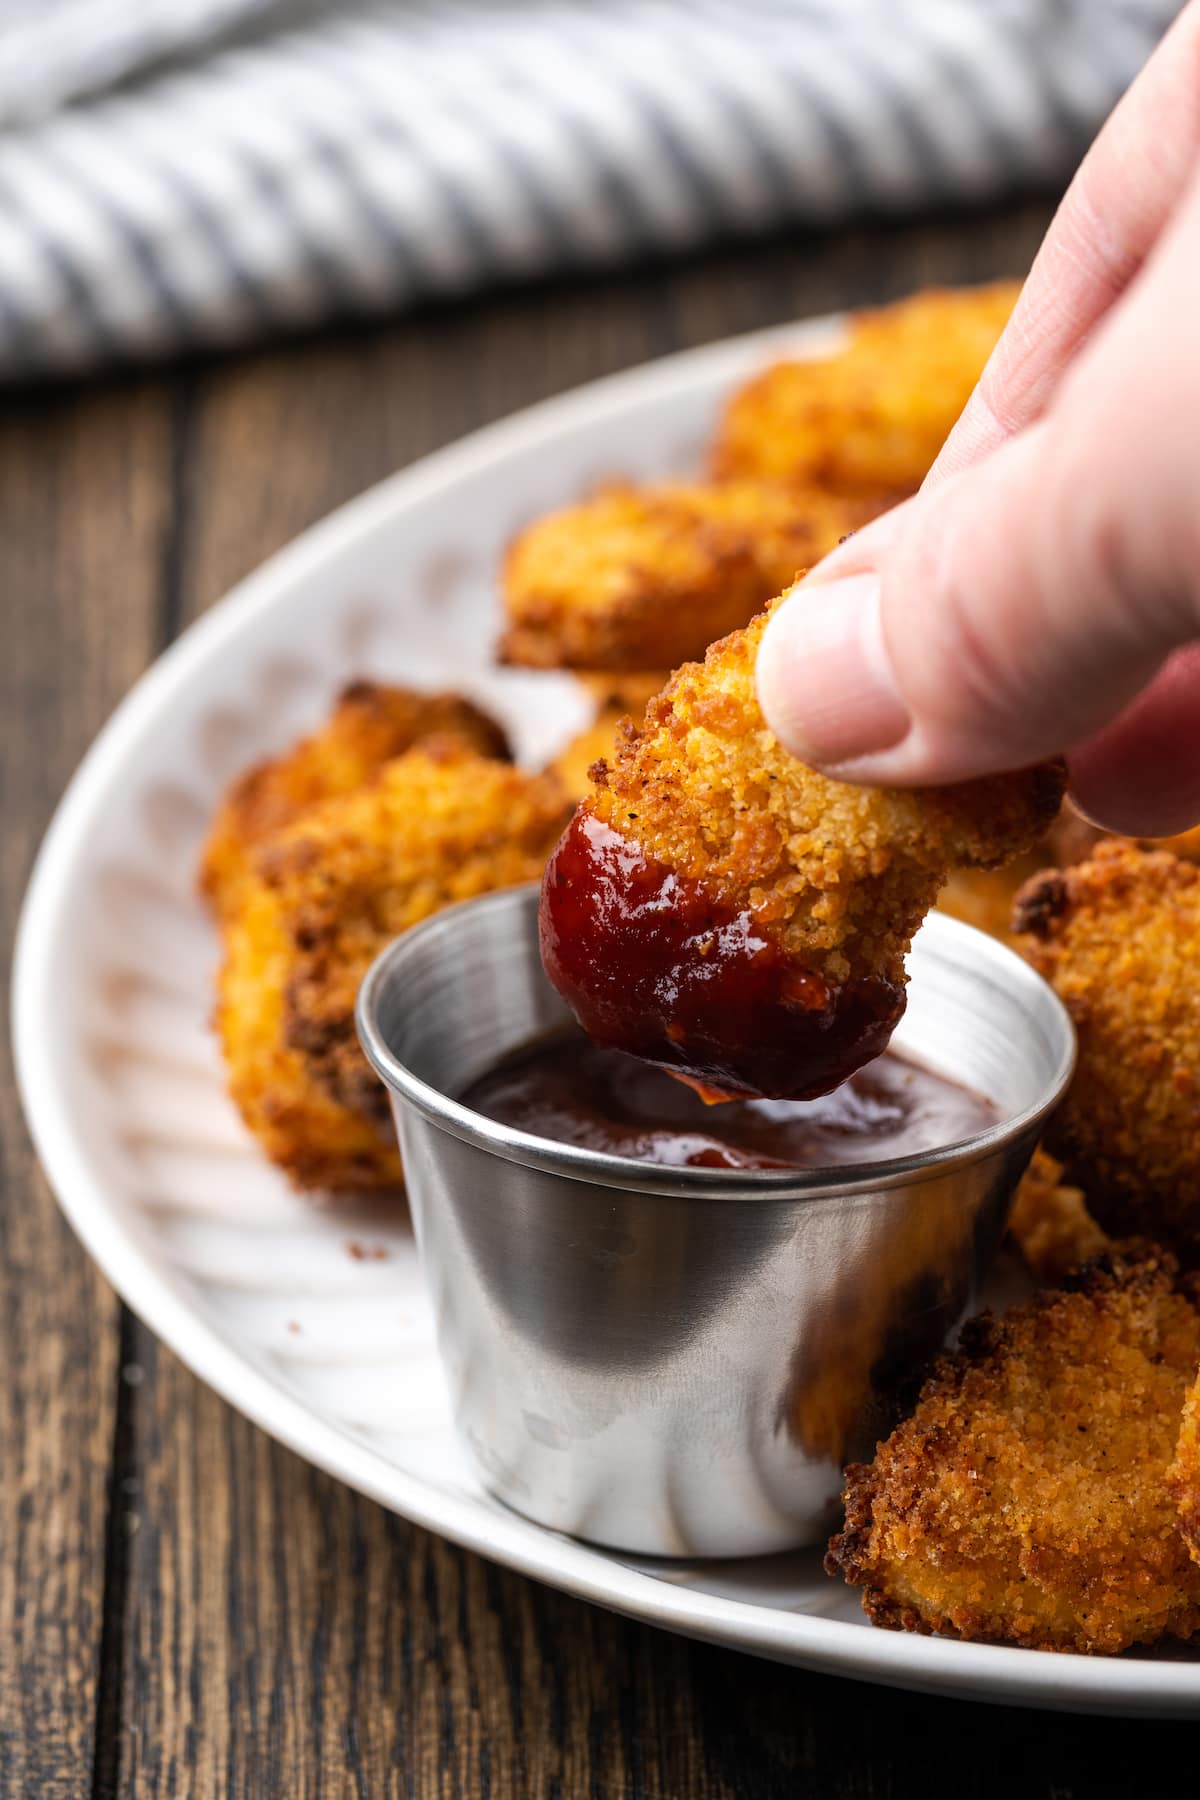 A hand holding a piece of popcorn chicken partially dipped into a ramekin of BBQ sauce, on a plate with more popcorn chicken pieces.